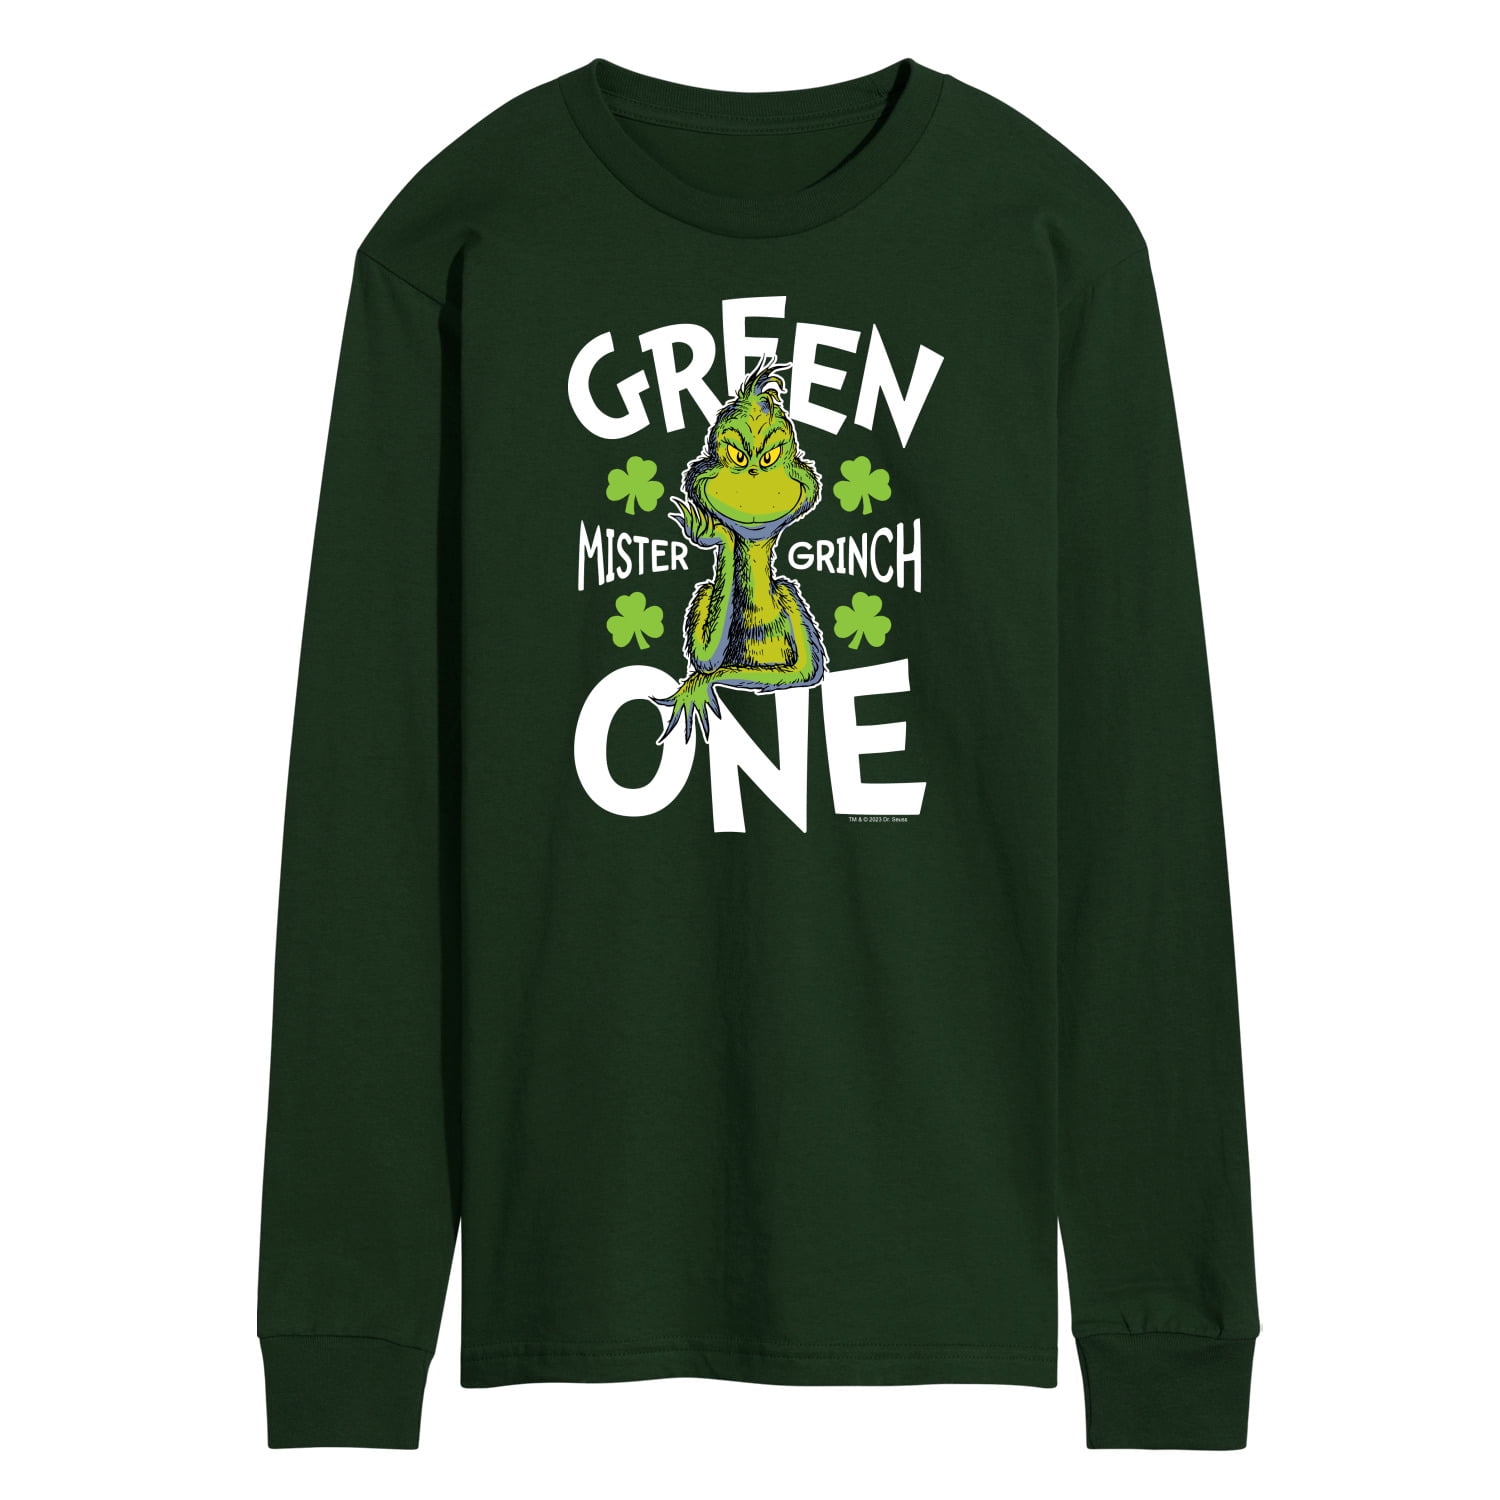 - Green - Grinch Sleeve Men\'s The Long One T-Shirt